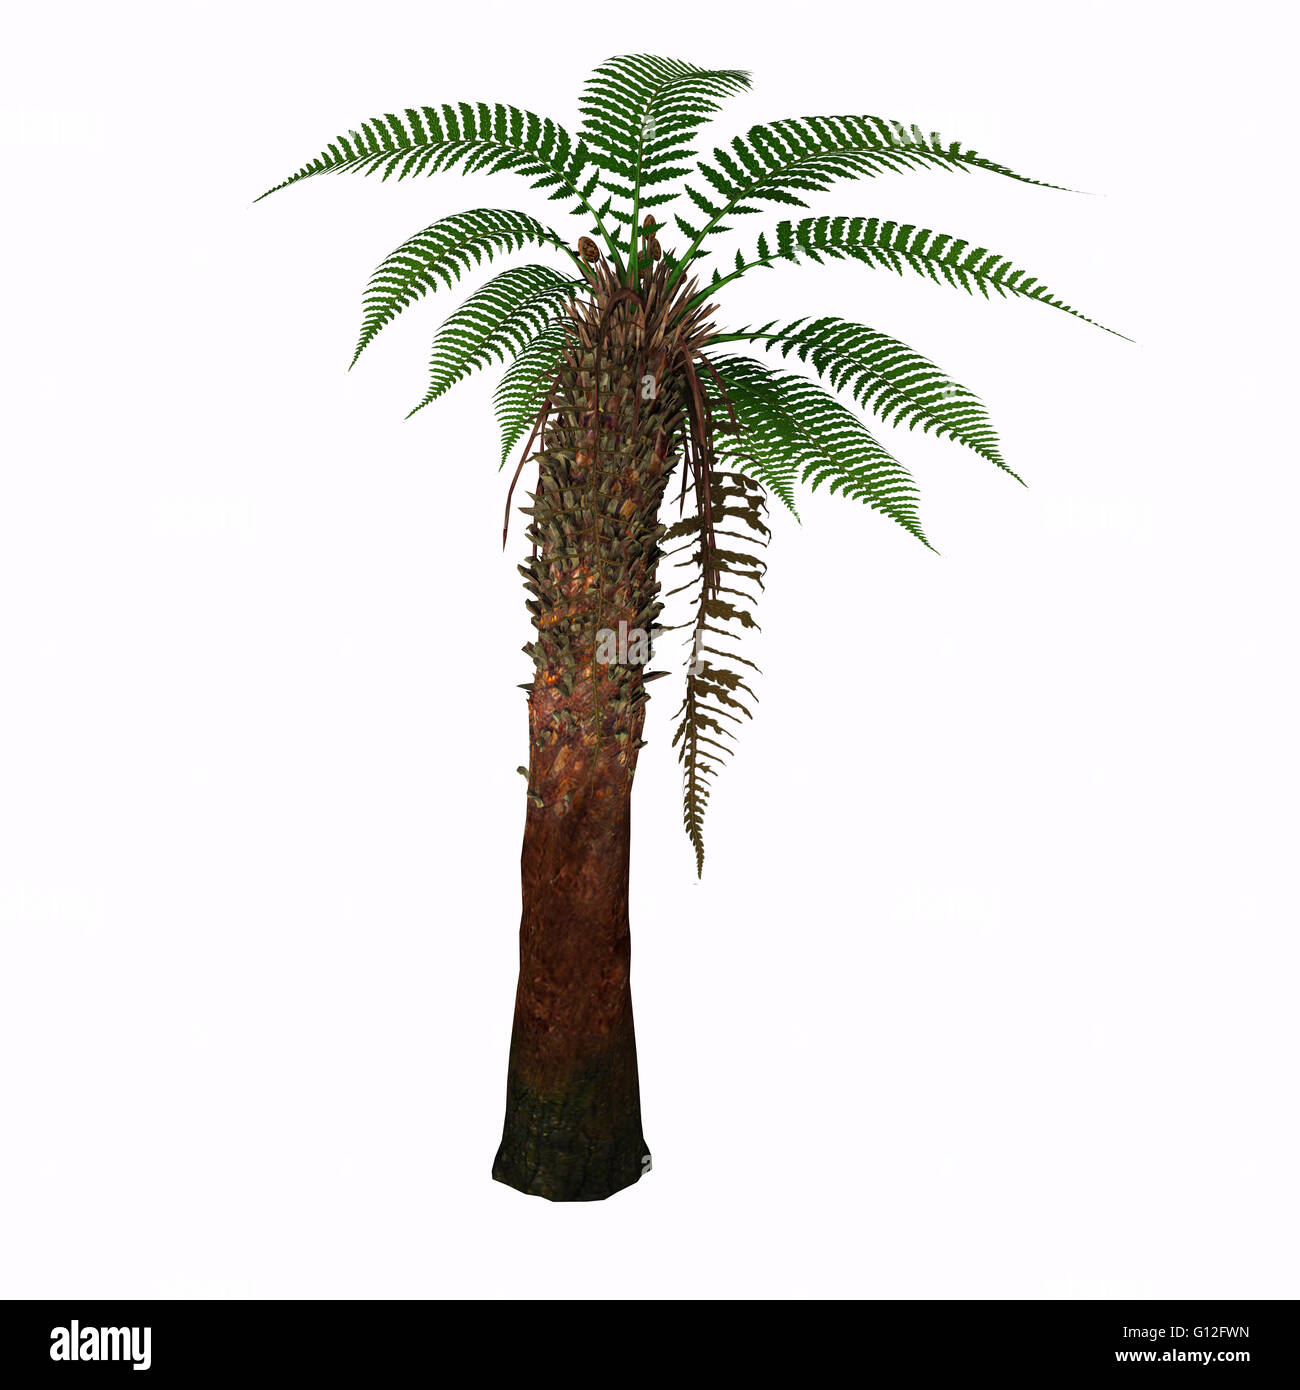 Dickonsia Antarctica Tree Fern with 15cm Trunk